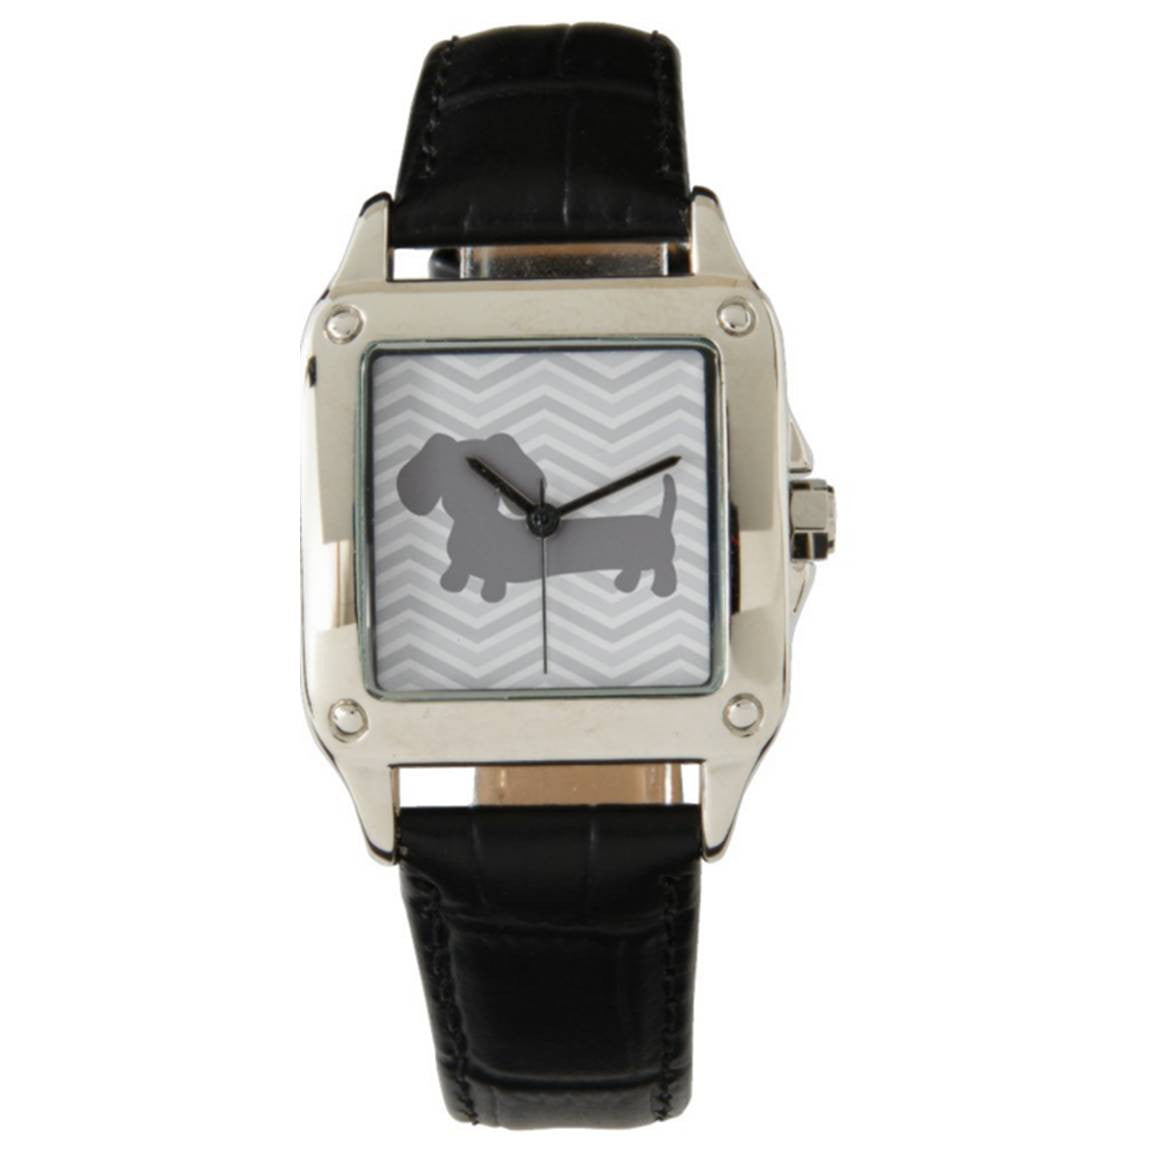 Wiener Dog Watch with Gray Chevrons – The Smoothe Store